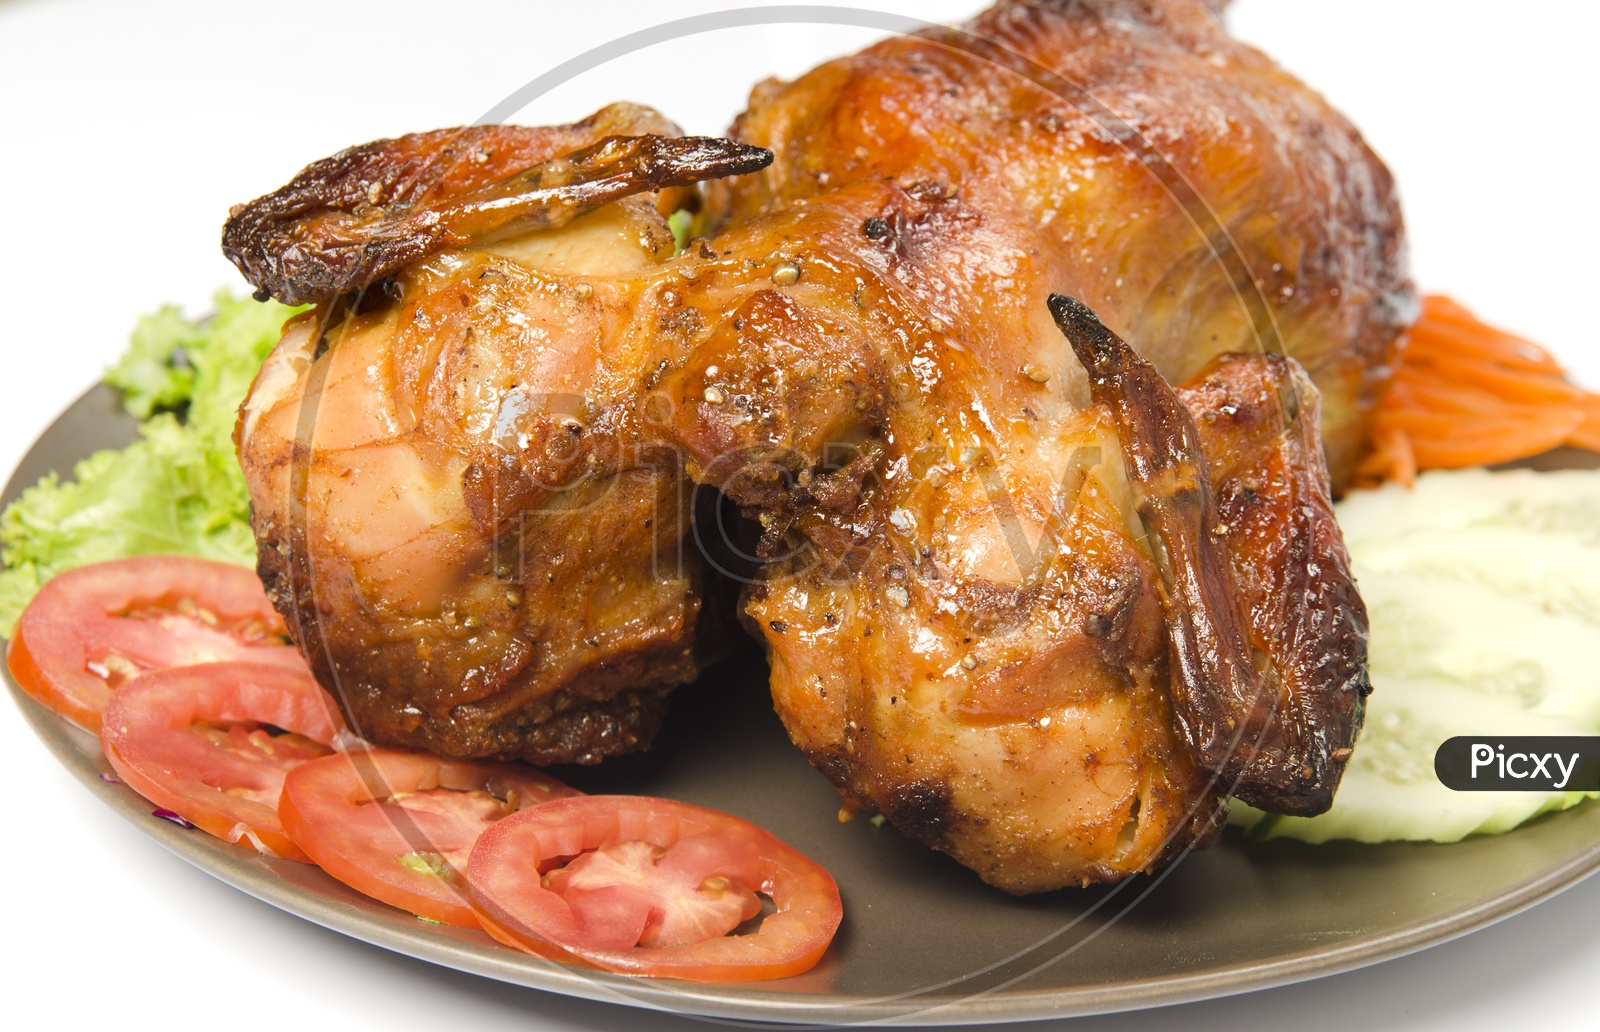 whole grilled chicken garnished with vegetables in plate